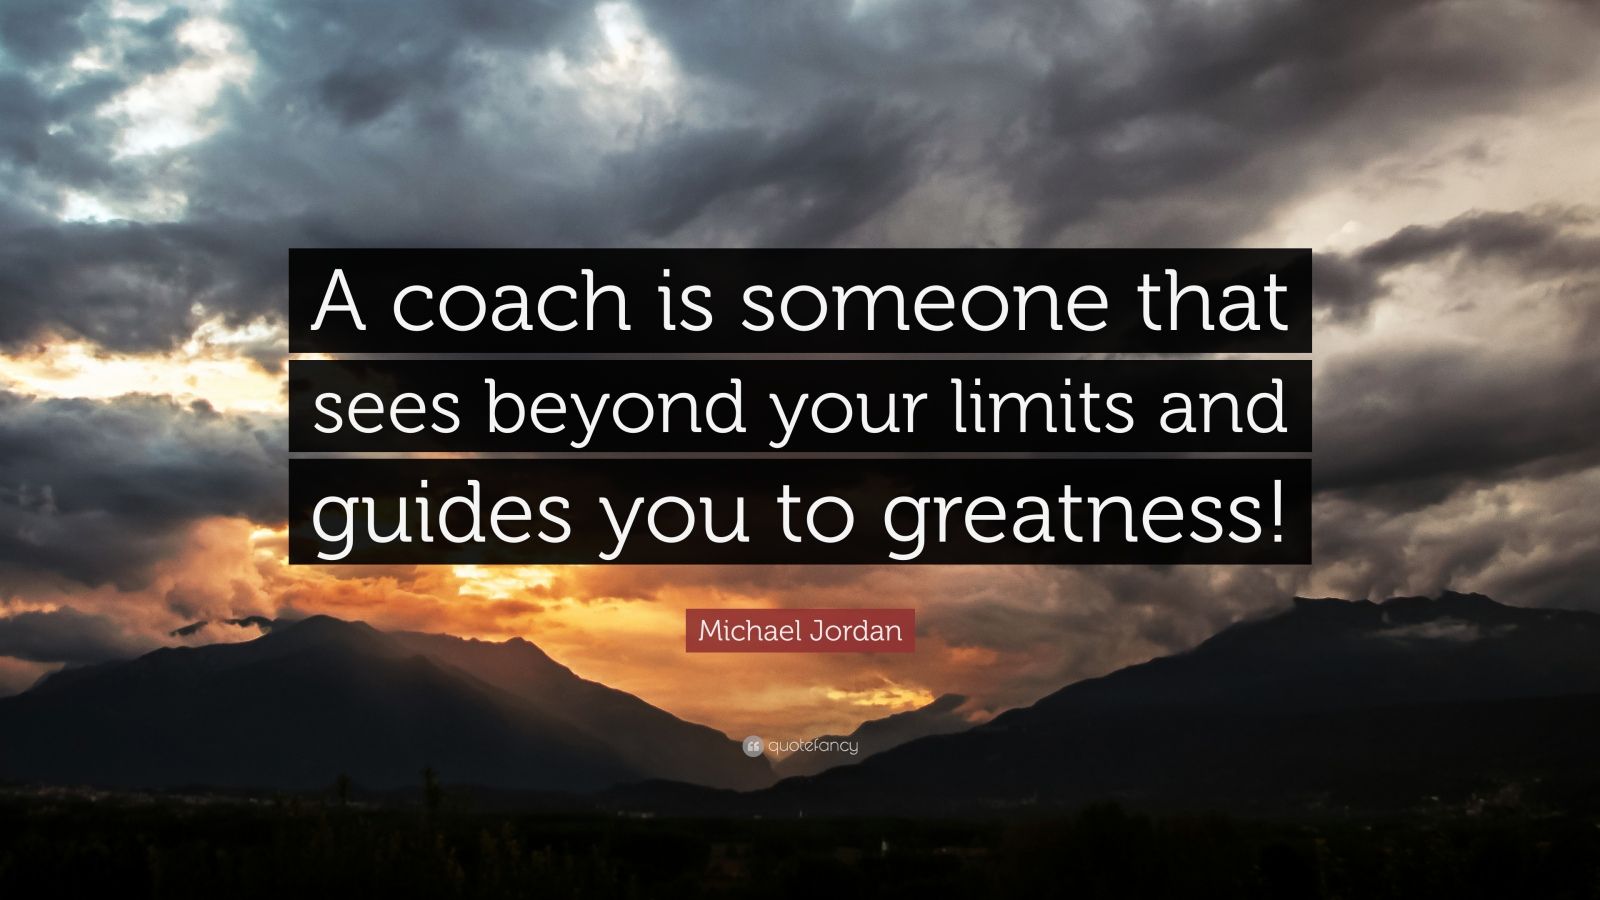 1784745 Michael Jordan Quote A coach is someone that sees beyond your